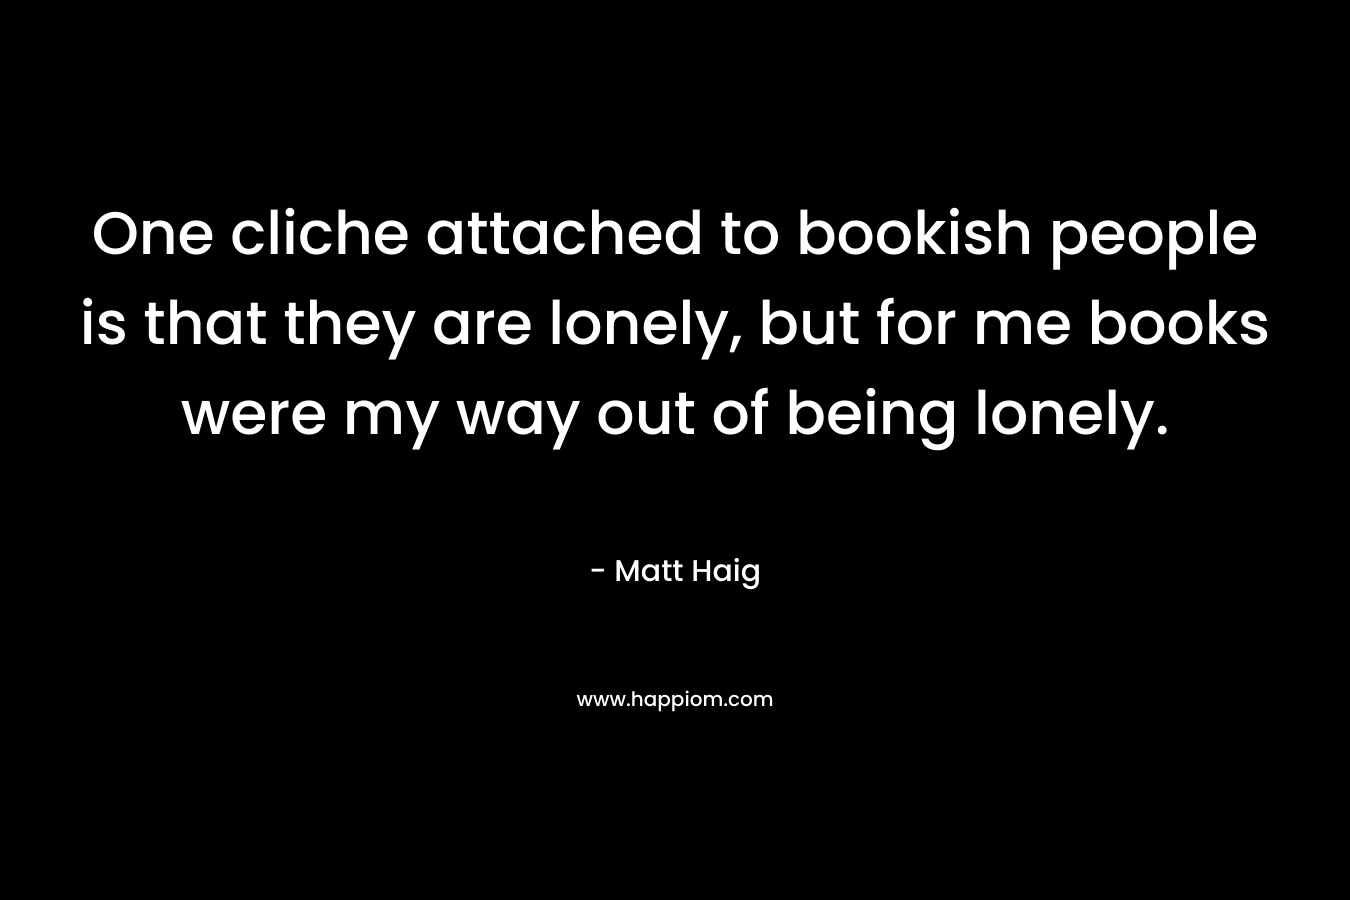 One cliche attached to bookish people is that they are lonely, but for me books were my way out of being lonely.